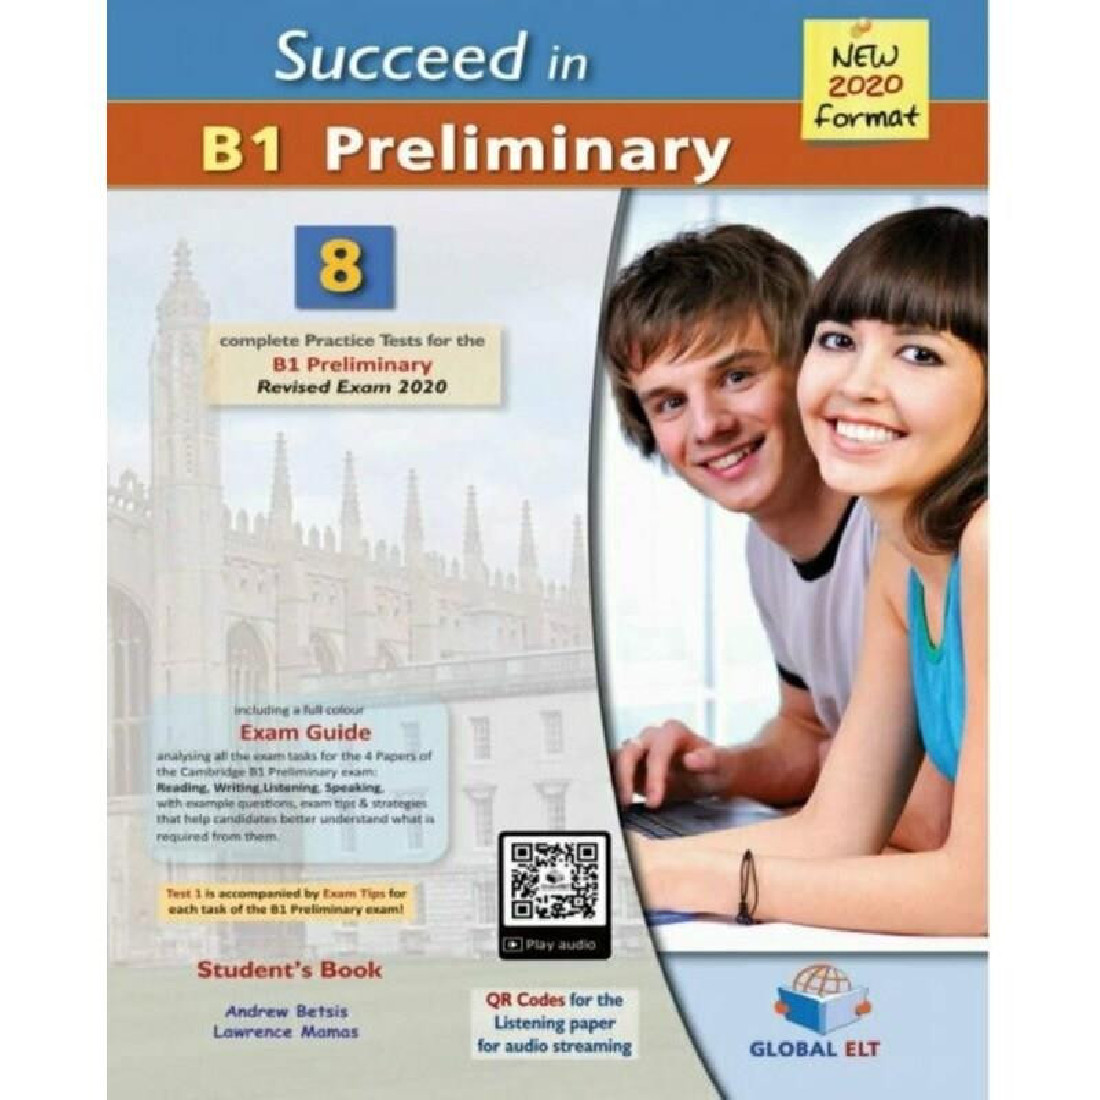 SUCCEED IN B1 PRELIMINARY 8 COMPLETE PRACTICE TESTS MP3 CD NEW 2020 FORMAT